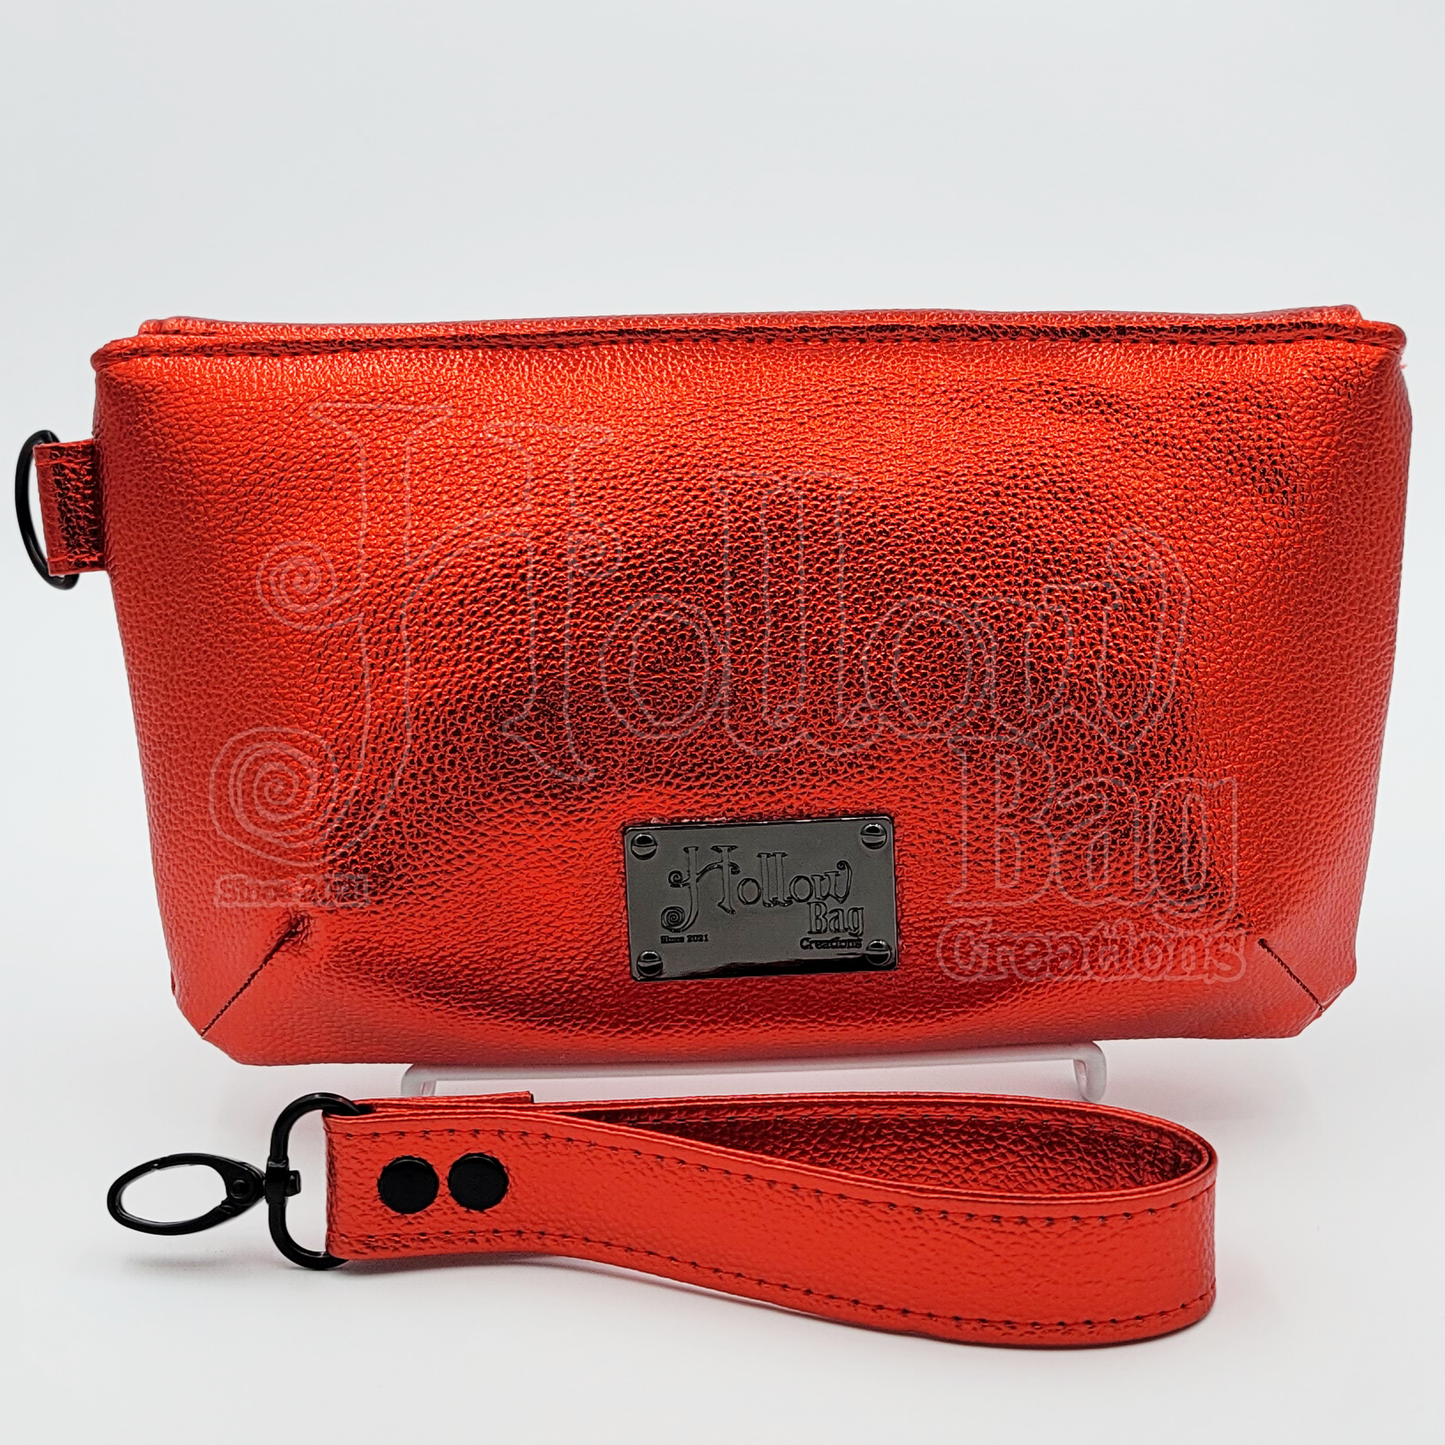 The Greedy Clutch - Sparkly Red